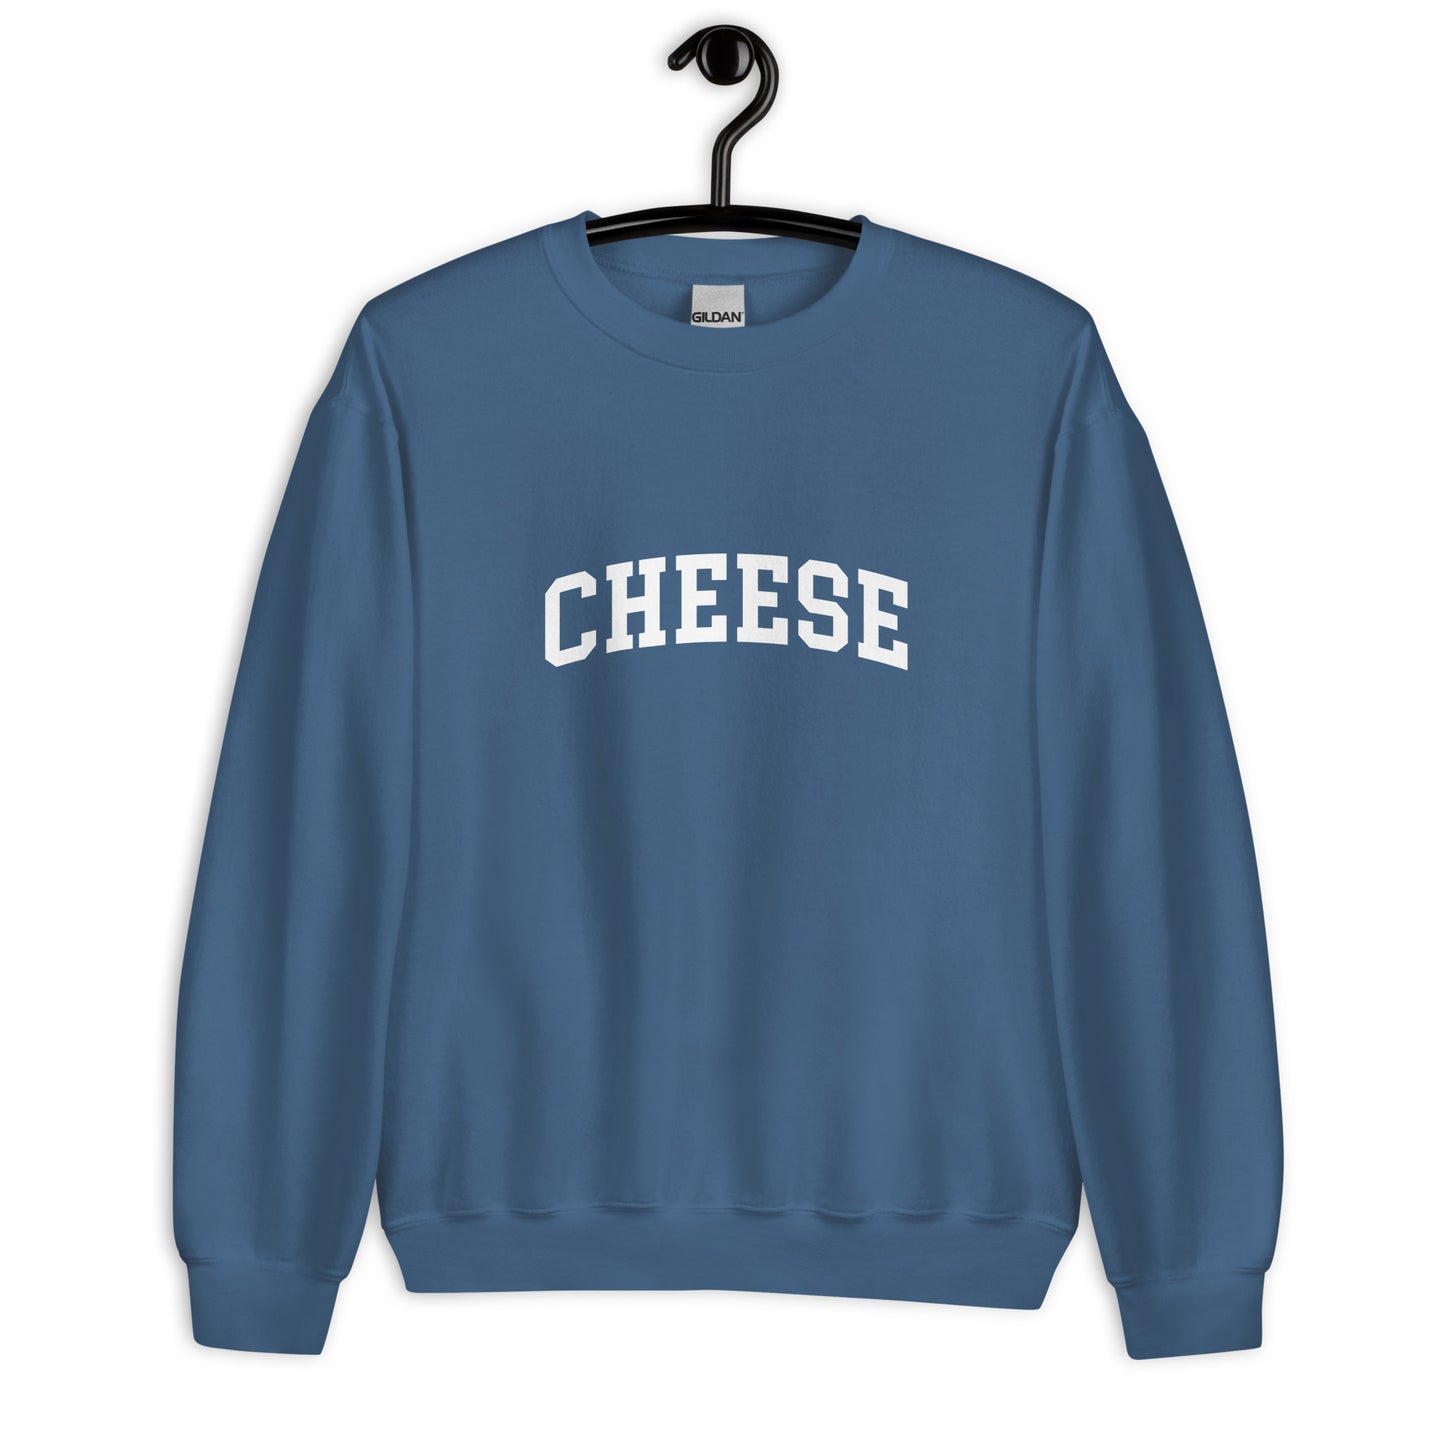 Cheese Sweatshirt - Arched Font